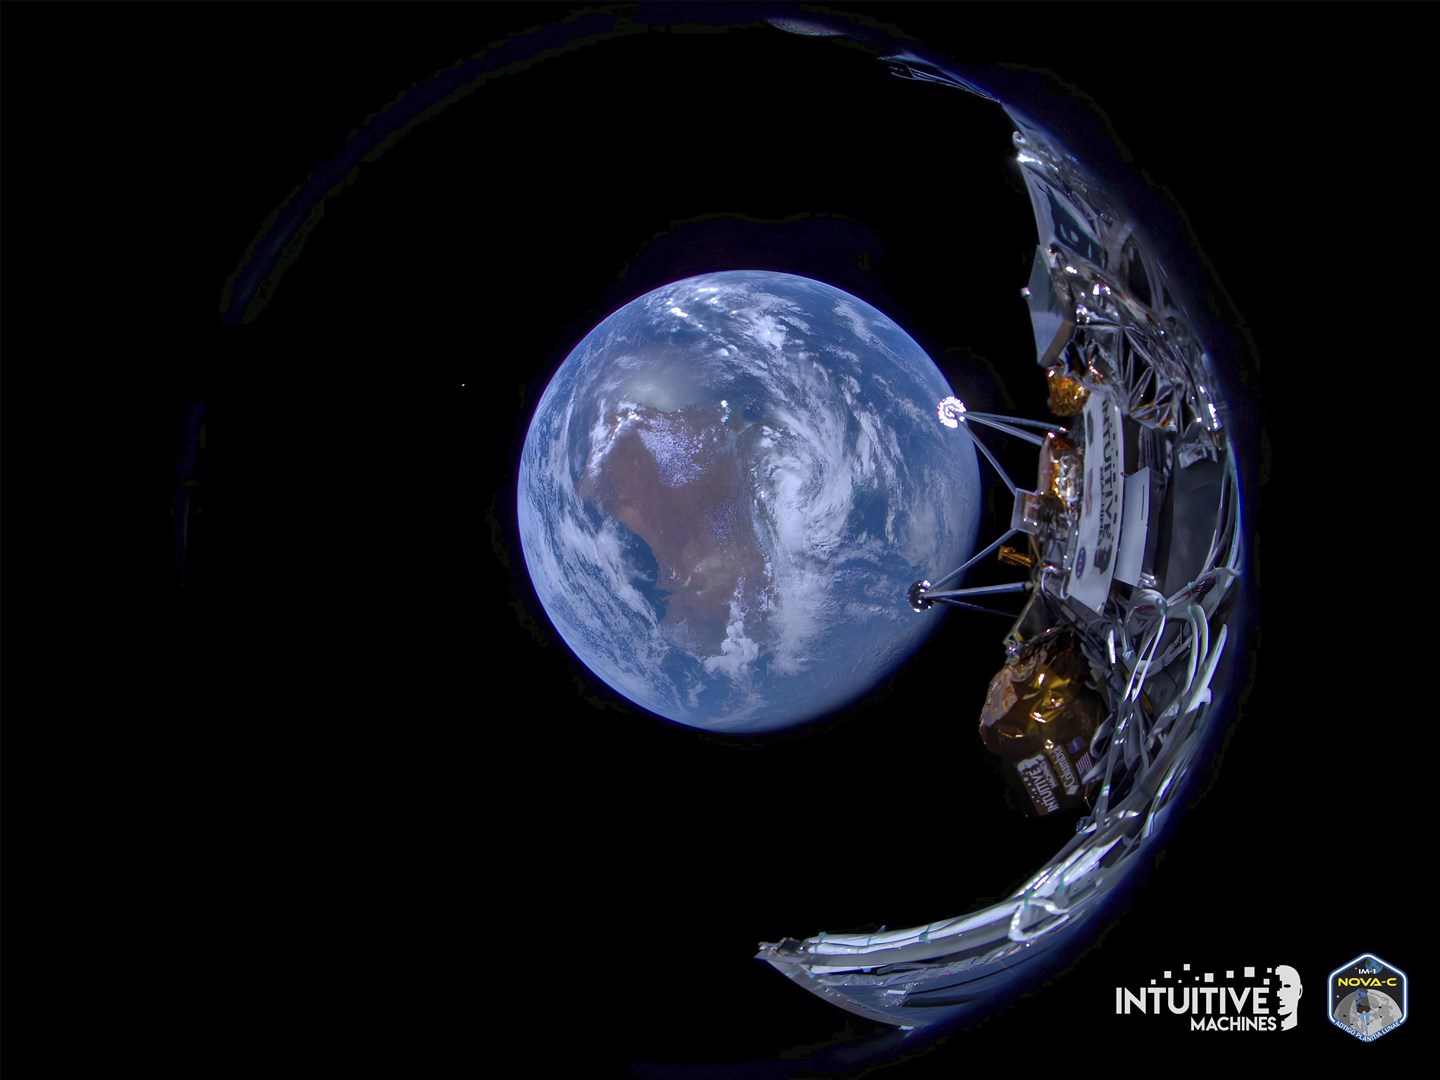 This image provided by Intuitive Machines shows its Odysseus lunar lander with the Earth in the background (Intuitive Machines/AP)